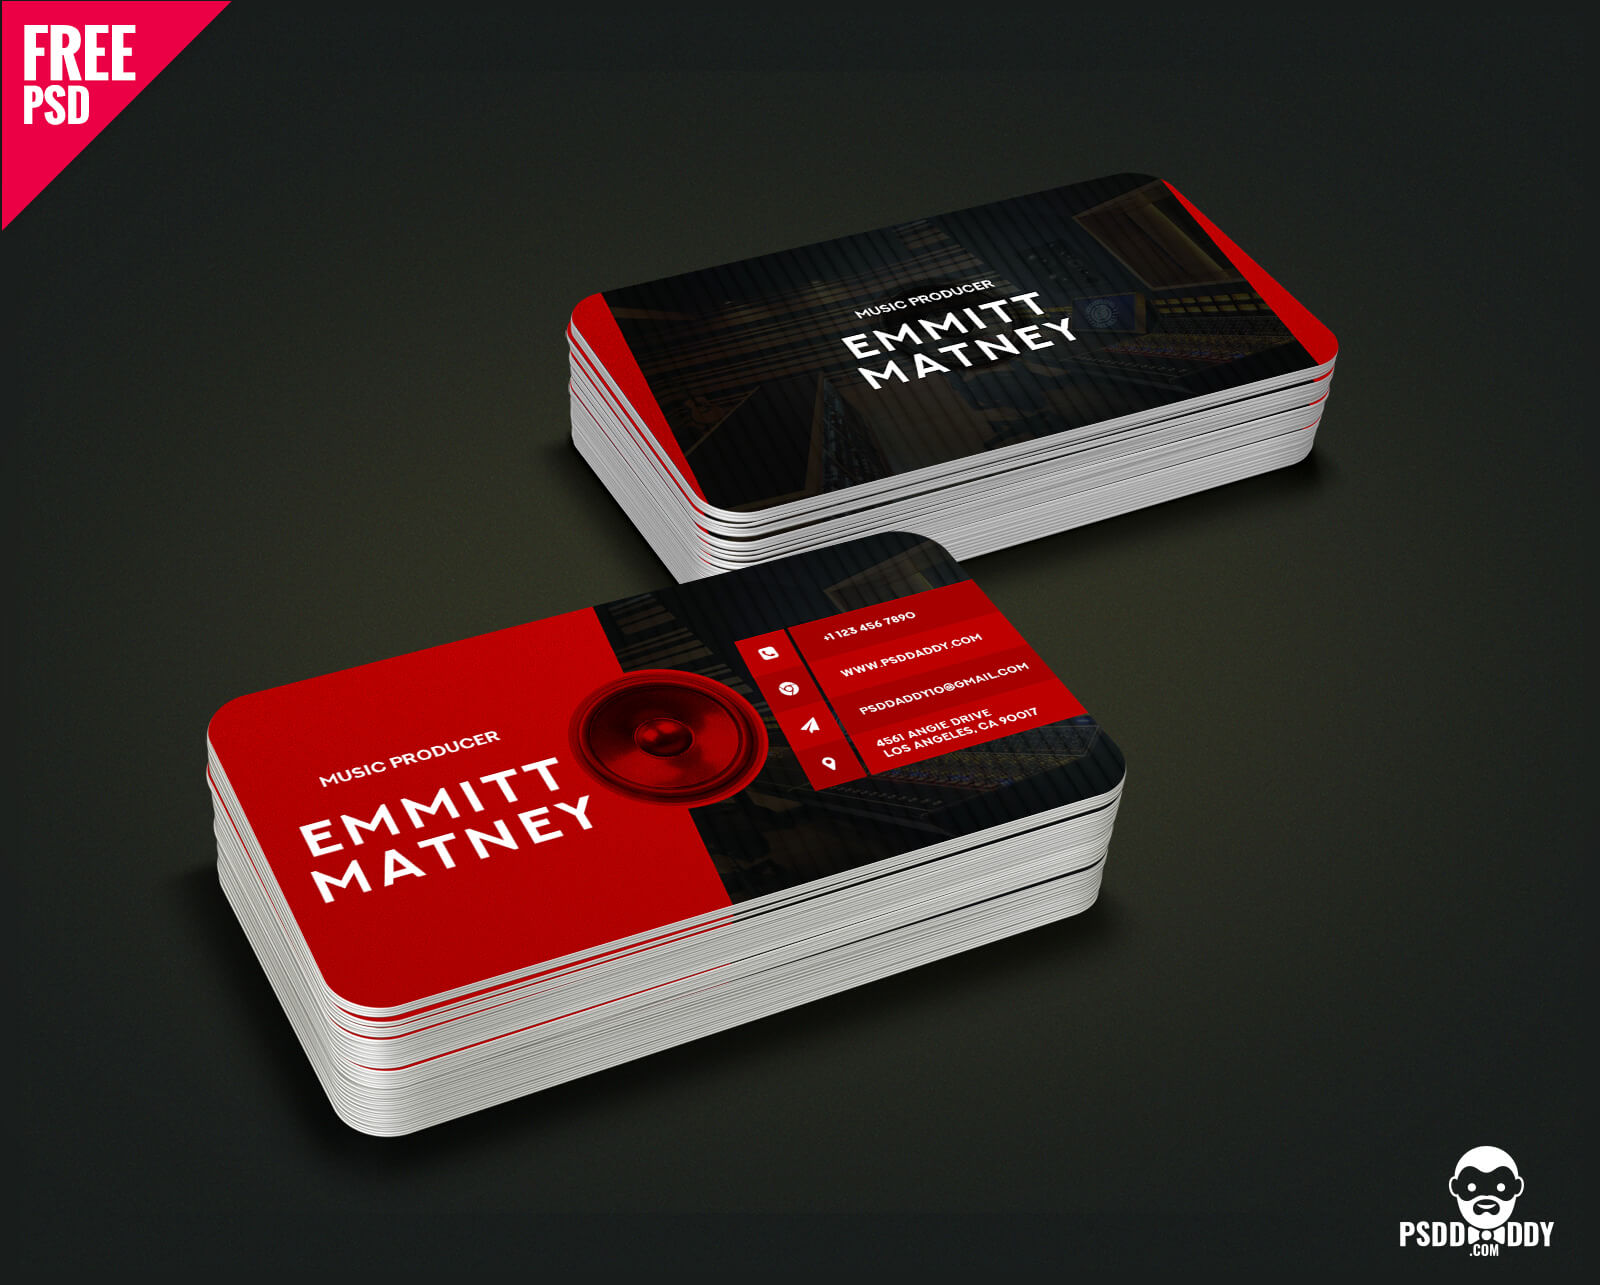 Download] Music Visiting Card Free Psd | Psddaddy For Free Psd Visiting Card Templates Download